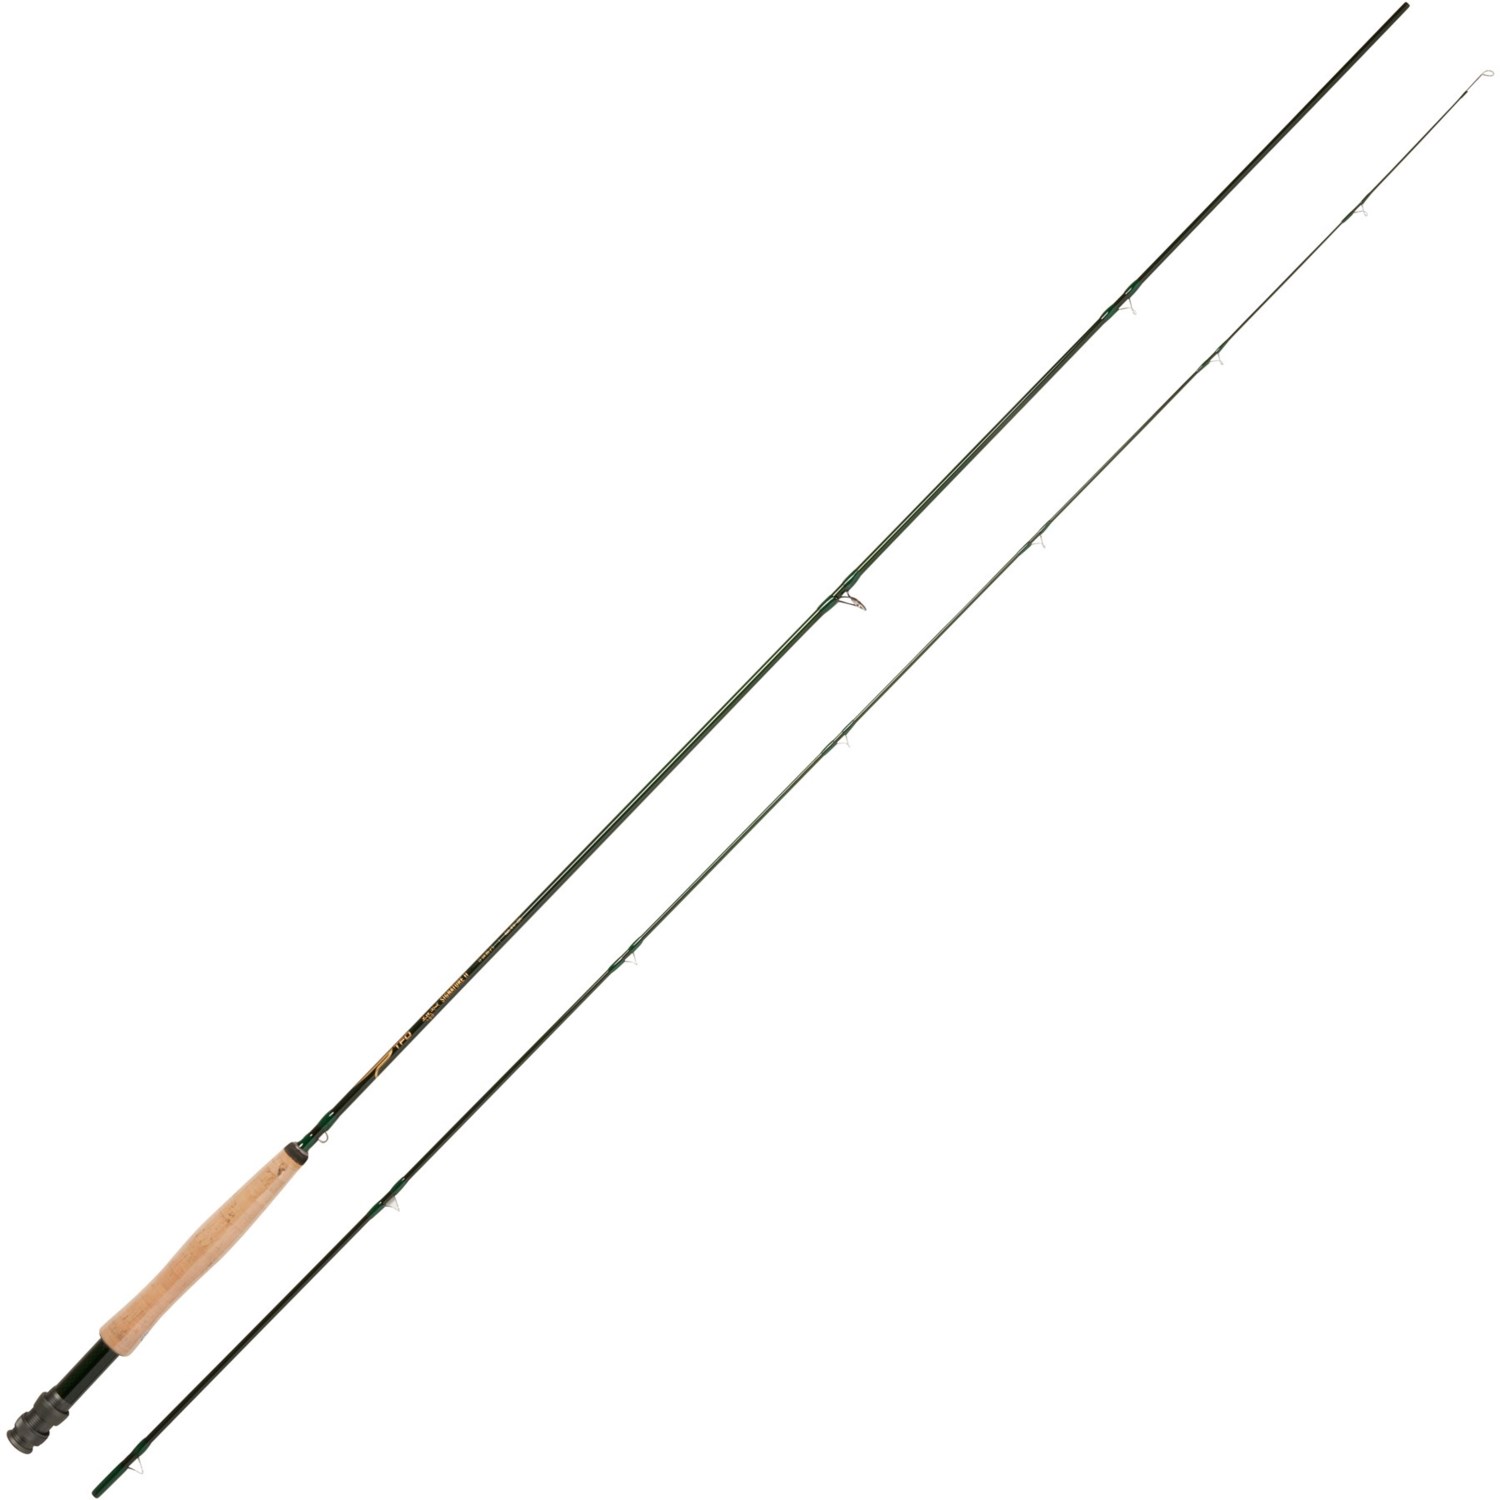 https://i.stpost.com/temple-fork-outfitters-signature-2-freshwater-fly-rod-4wt-86-2-piece-in-multi~p~3vuhr_01~1500.2.jpg